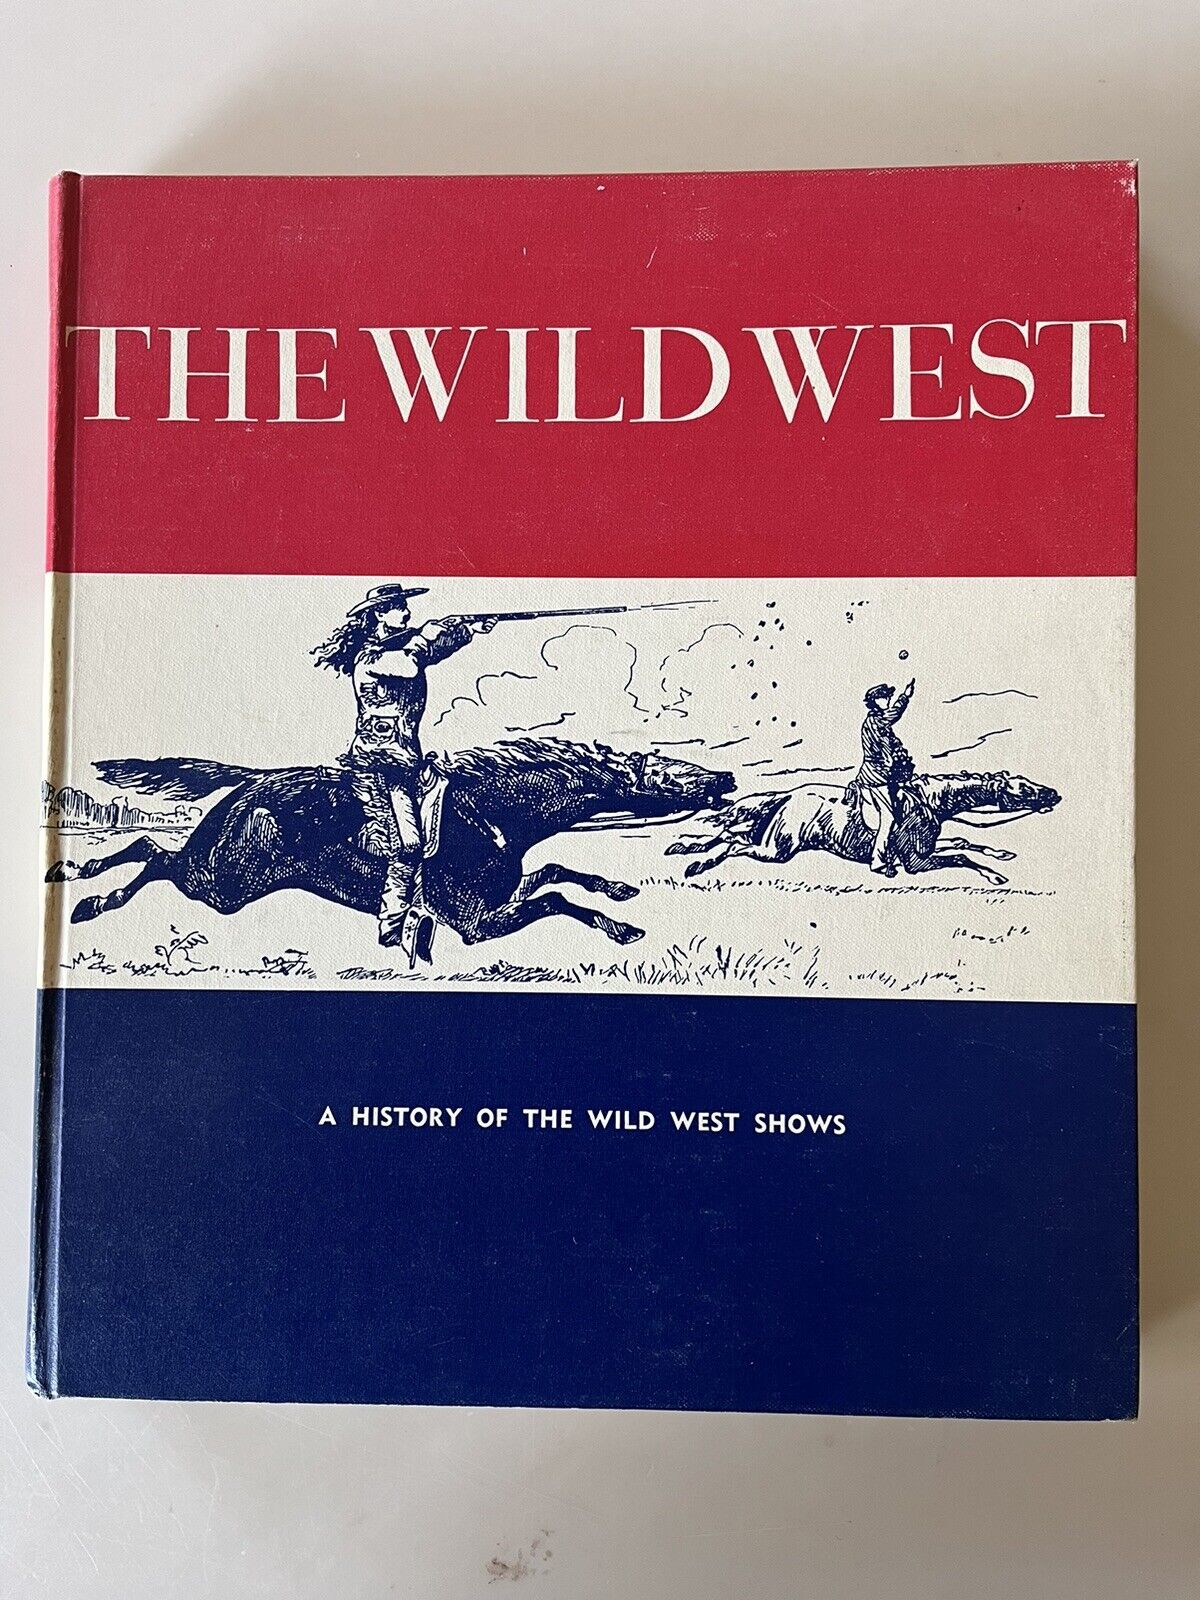 THE WILD WEST Or, a History of the Wild West Shows by Don Russell 1970